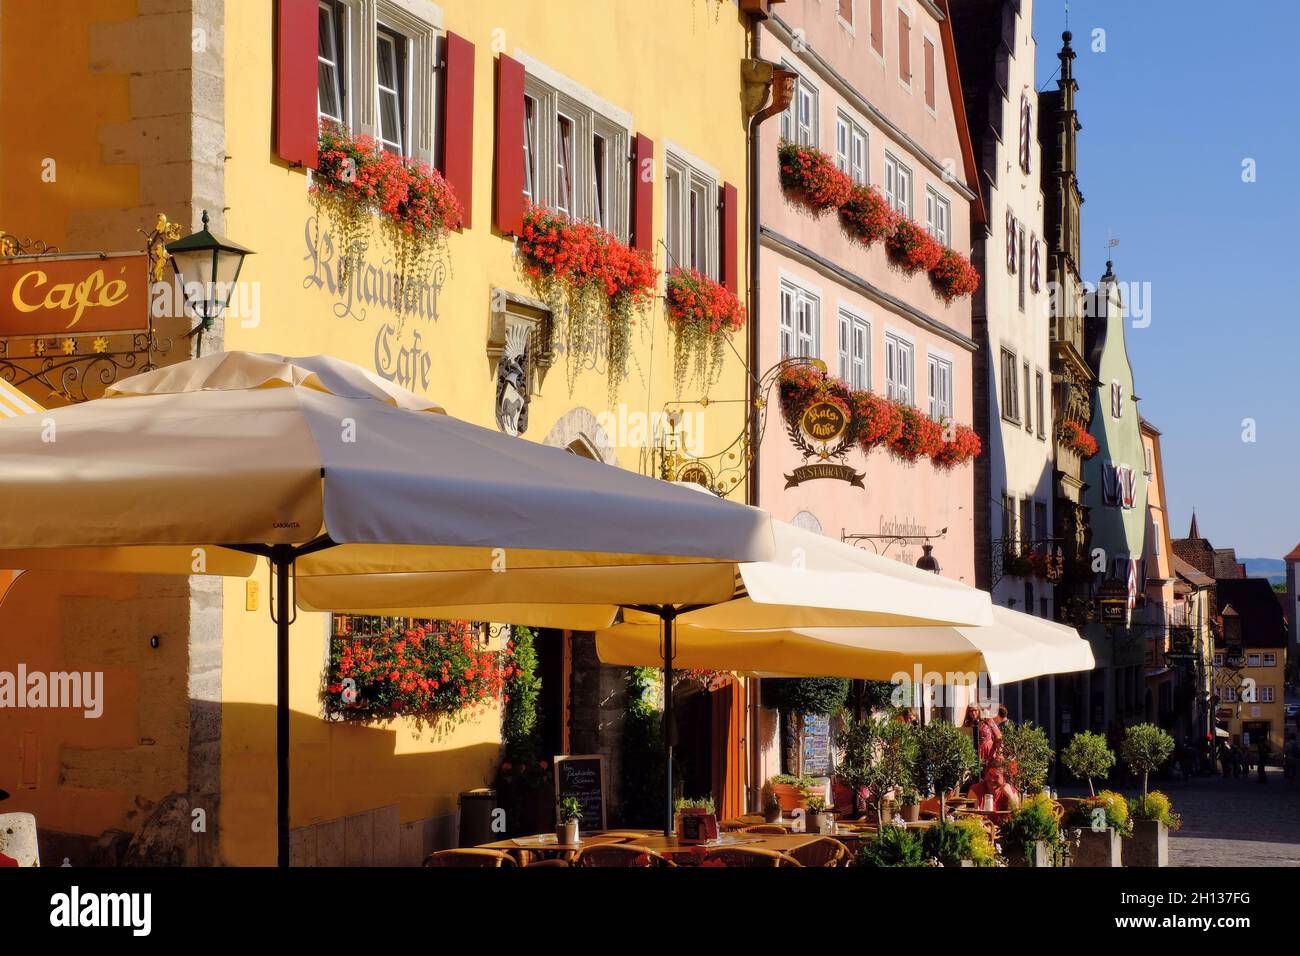 Colourful traditional buildings and outdoor cafes soon before sunset in Rothenburg ob der Tauber, Bavaria, Germany Stock Photo